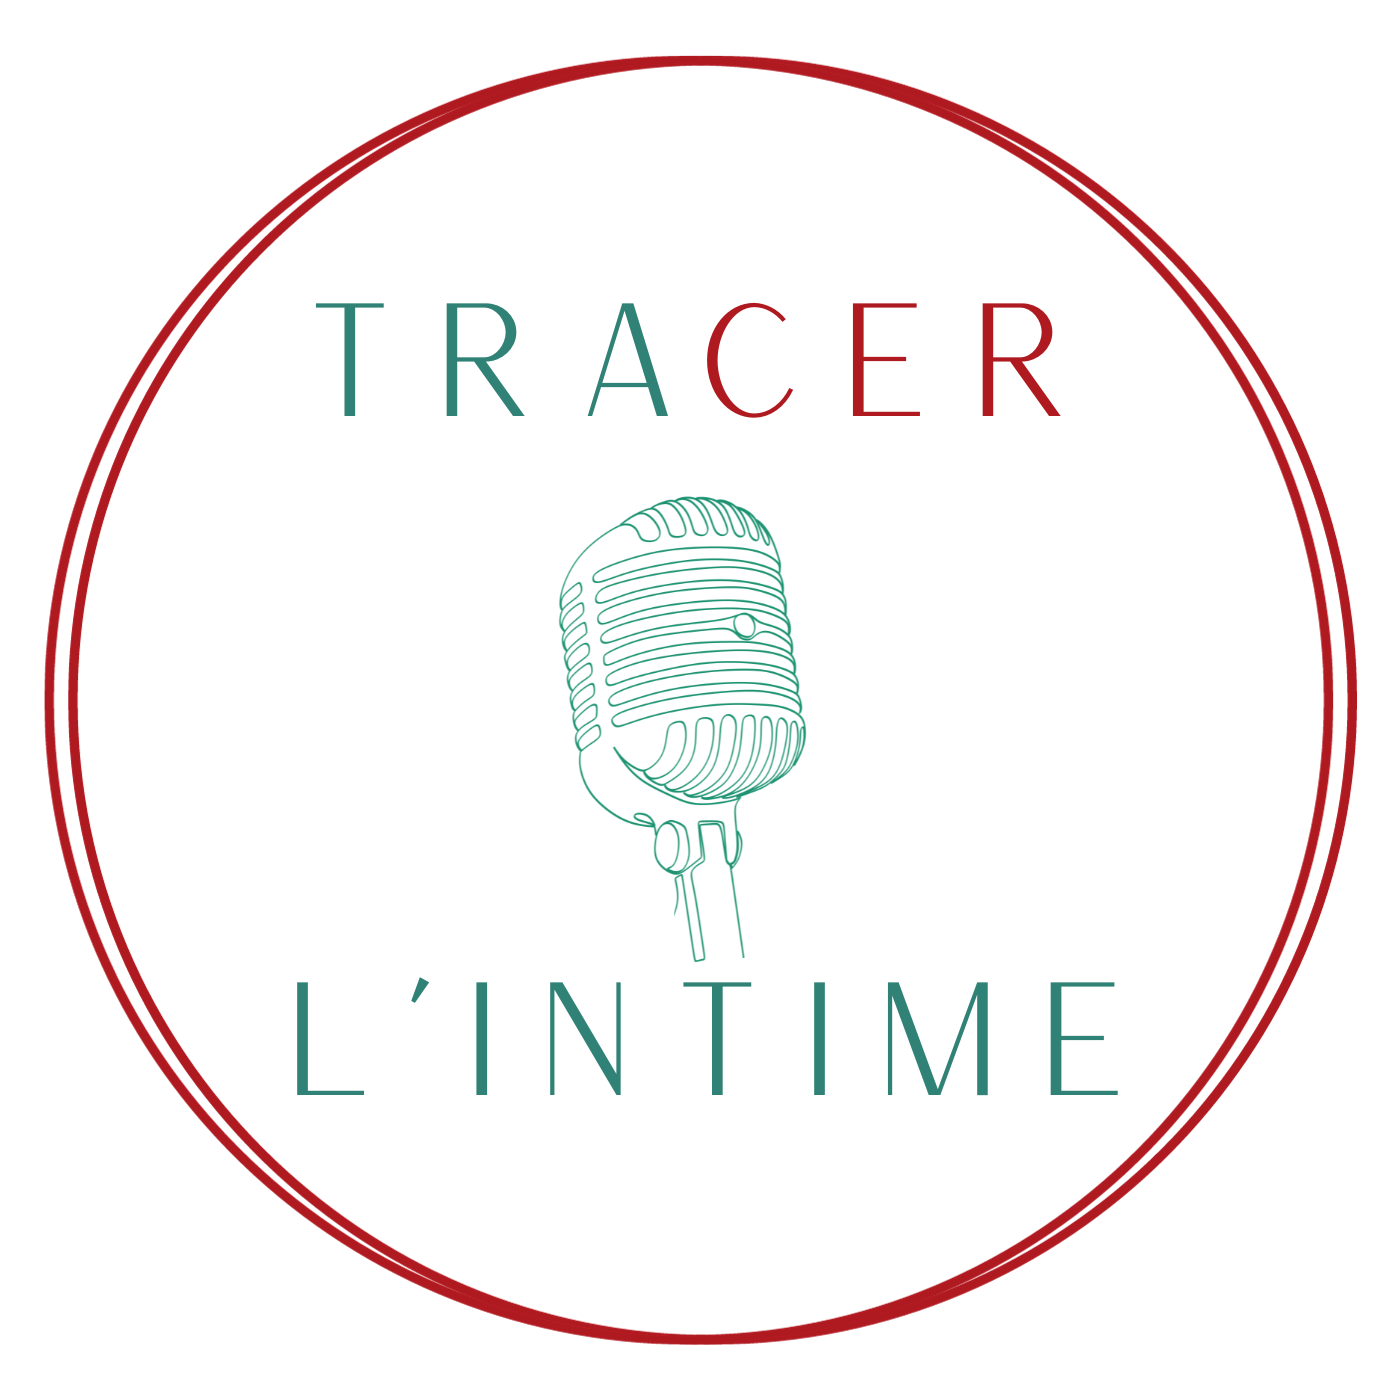 Tracer lintime 1400 x 1400 px 1